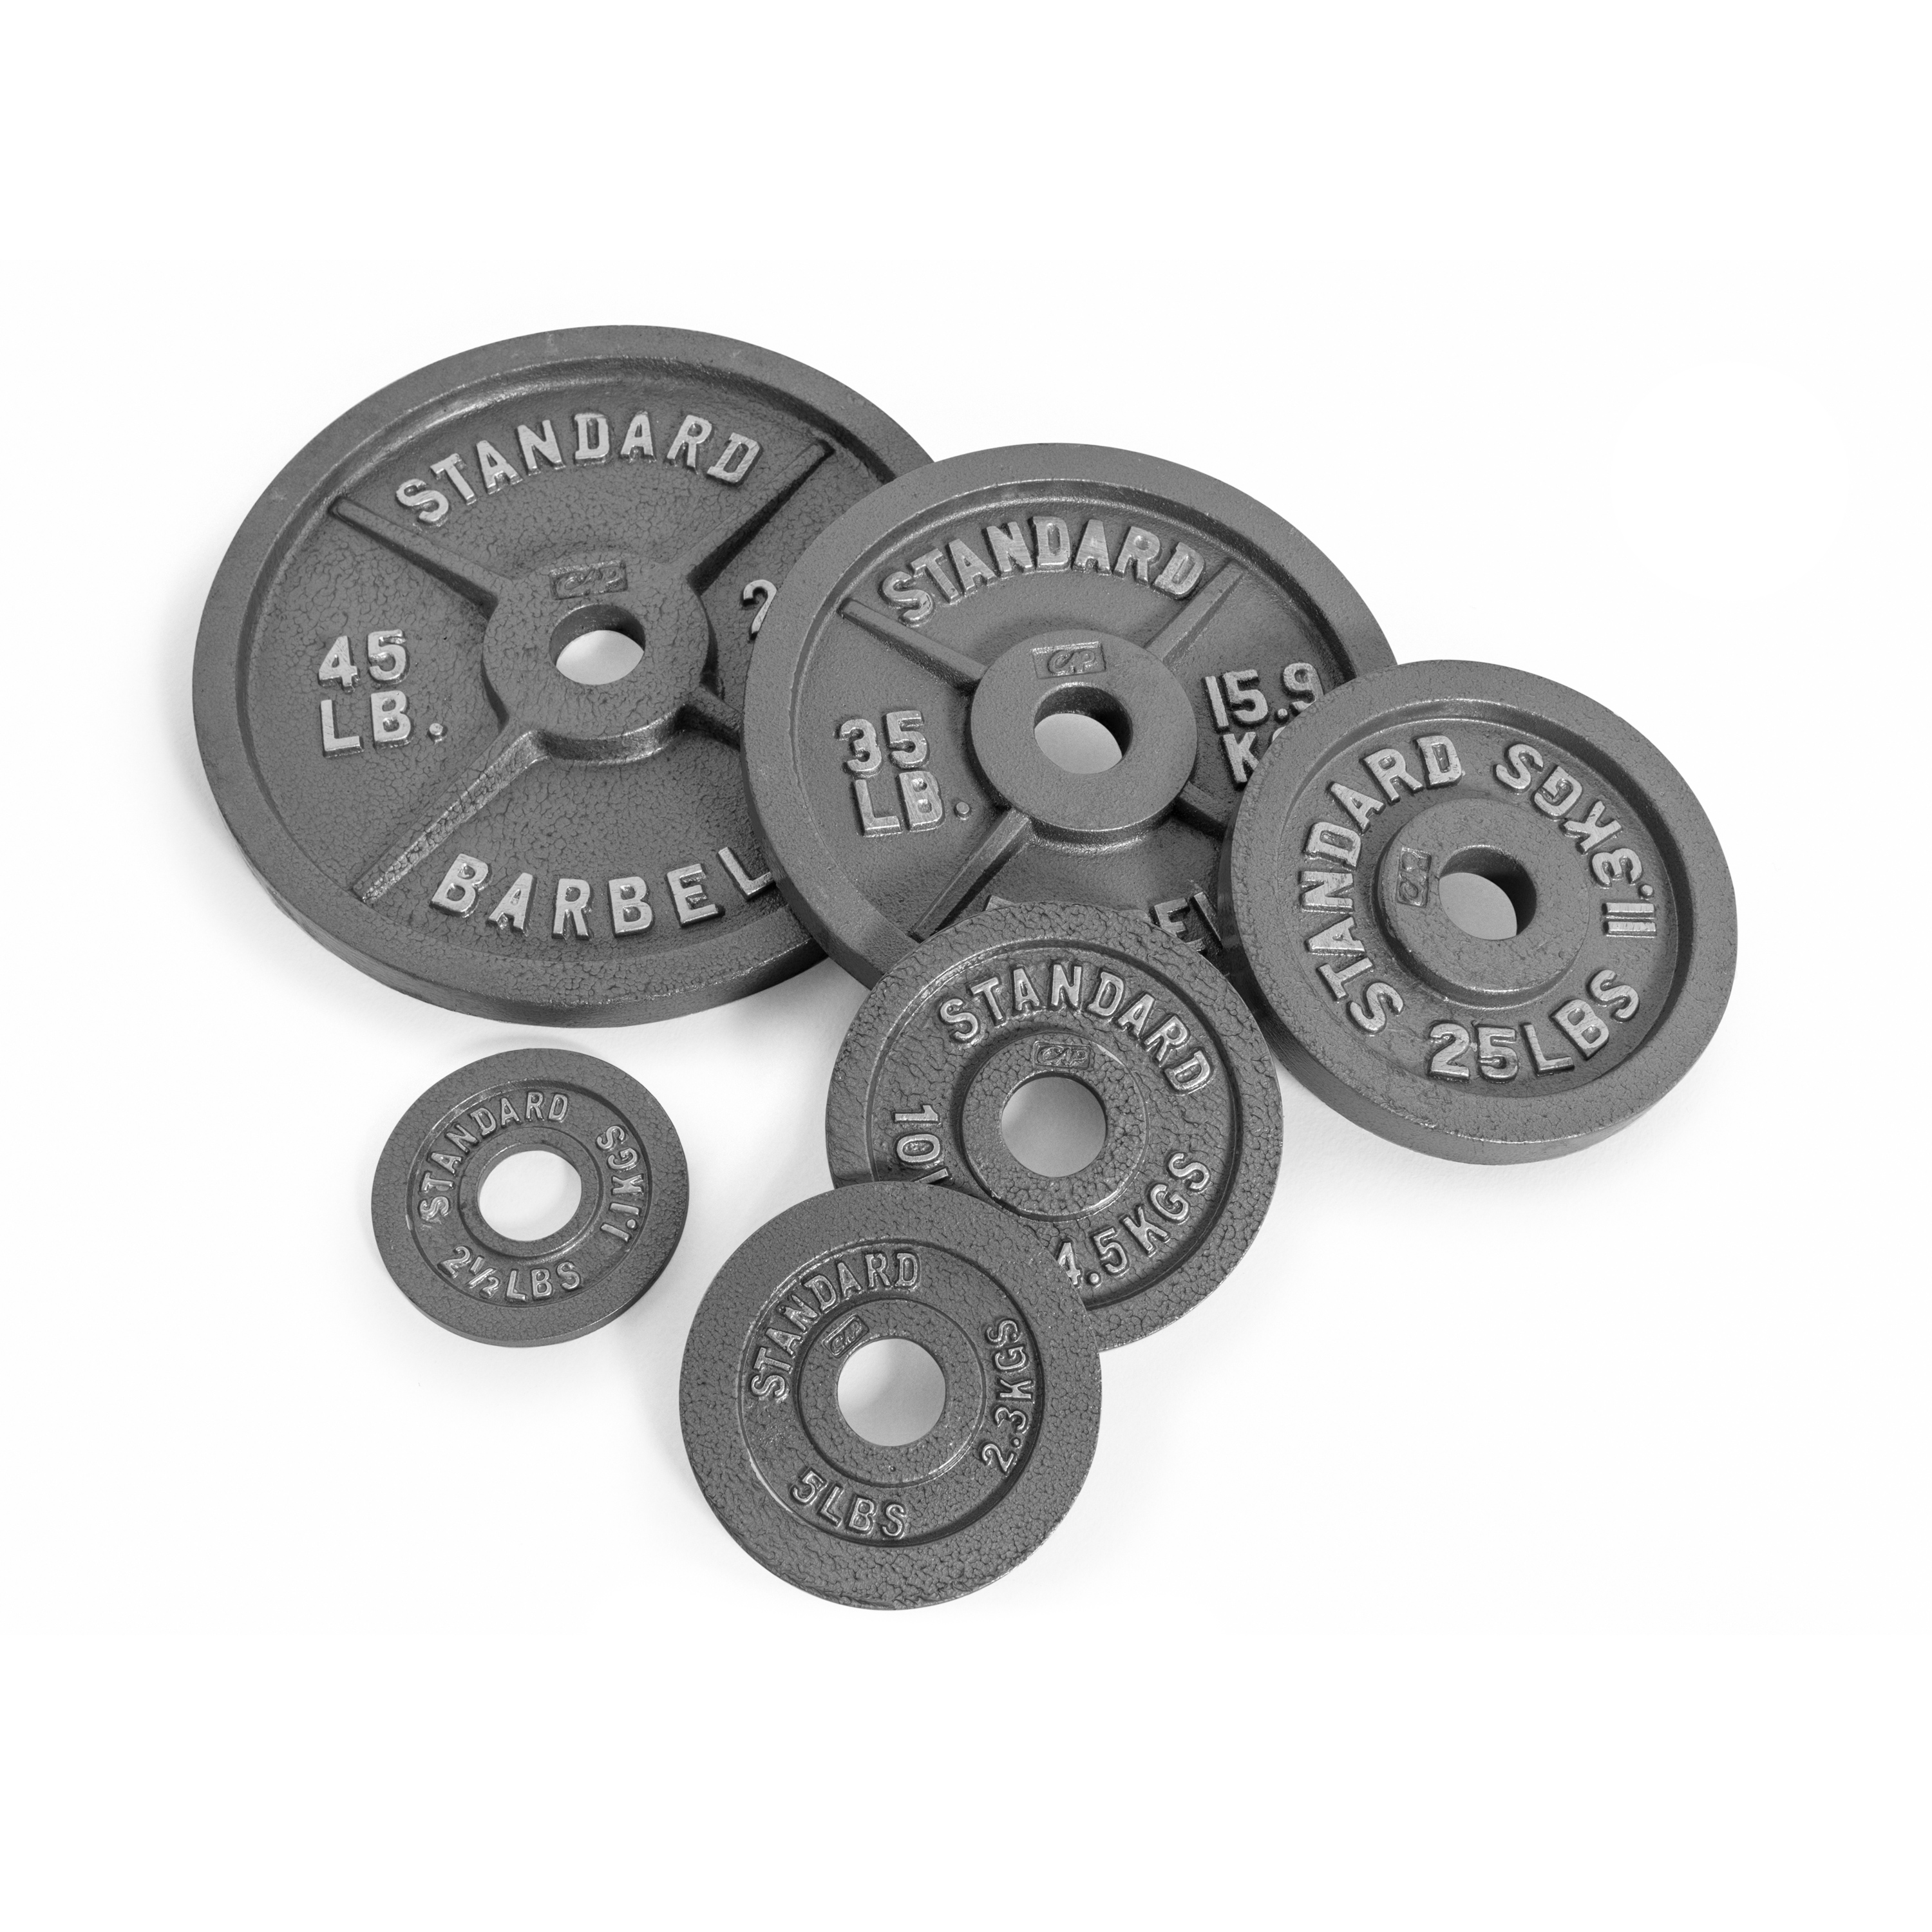 CAP Barbell Gray Olympic Cast Iron Weight Plate, 2.5-100 lb, Singles - image 2 of 2